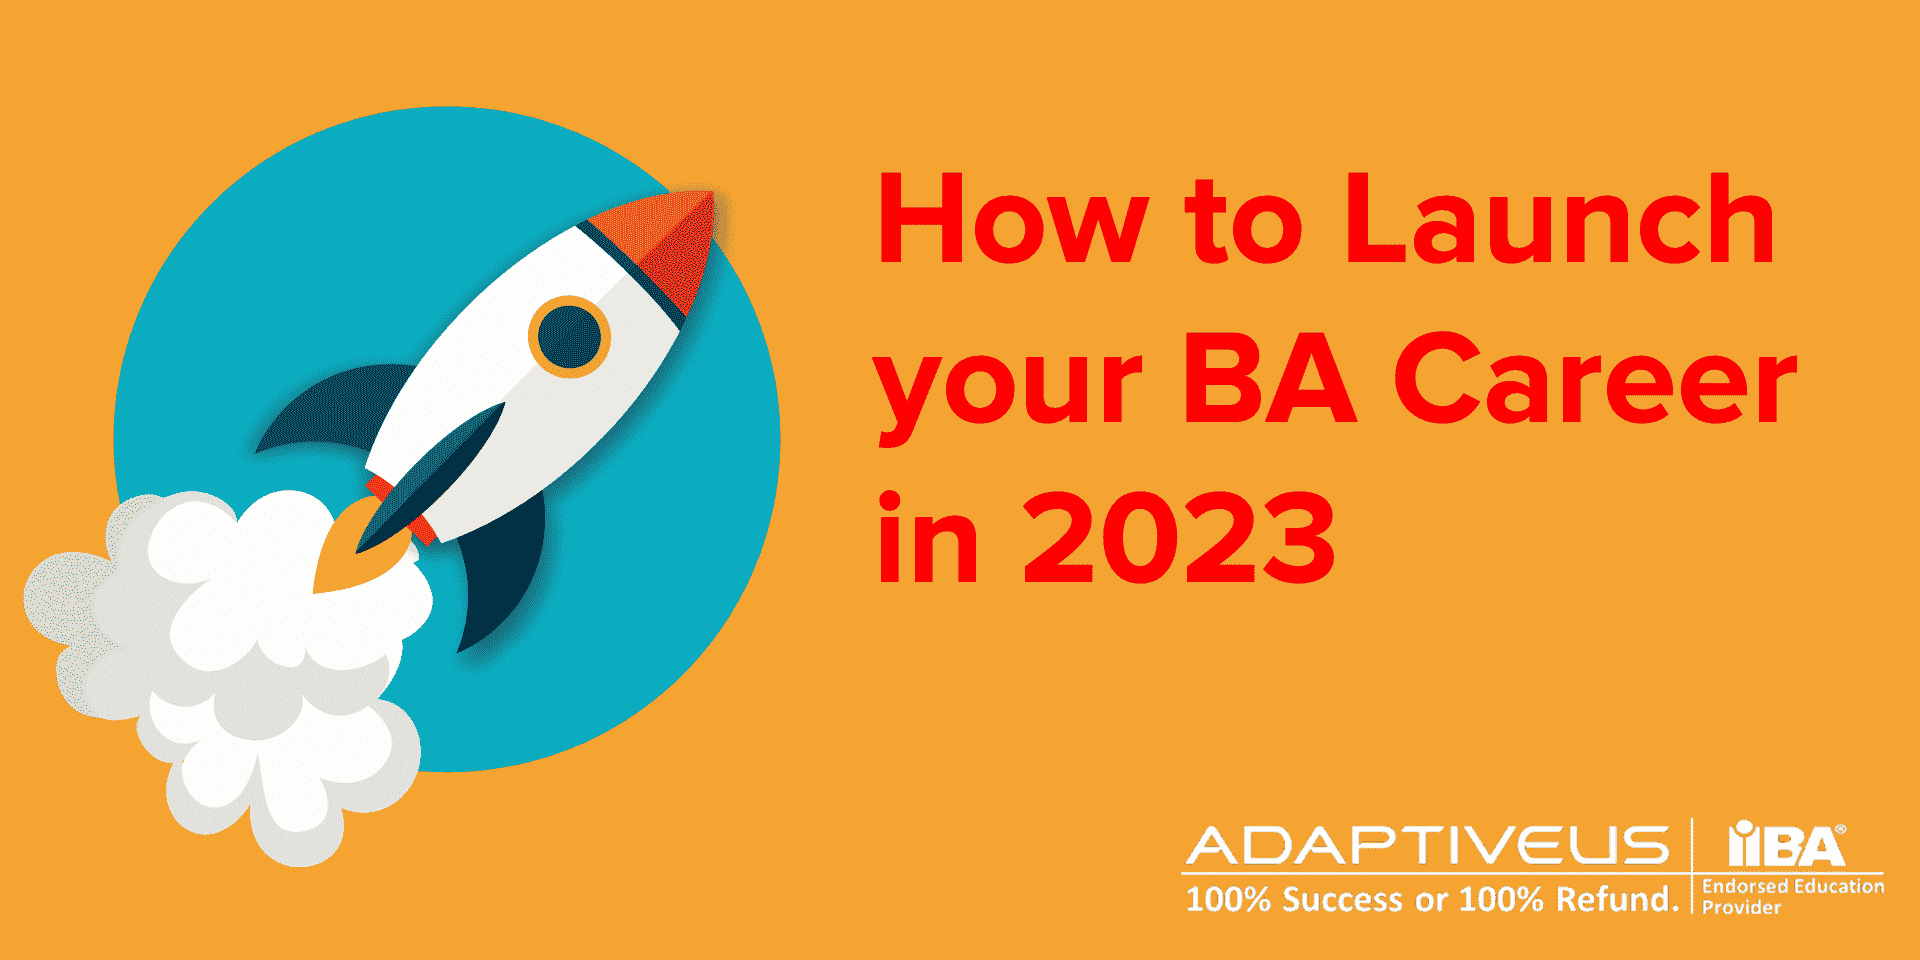 How to Launch your BA Career in 2023